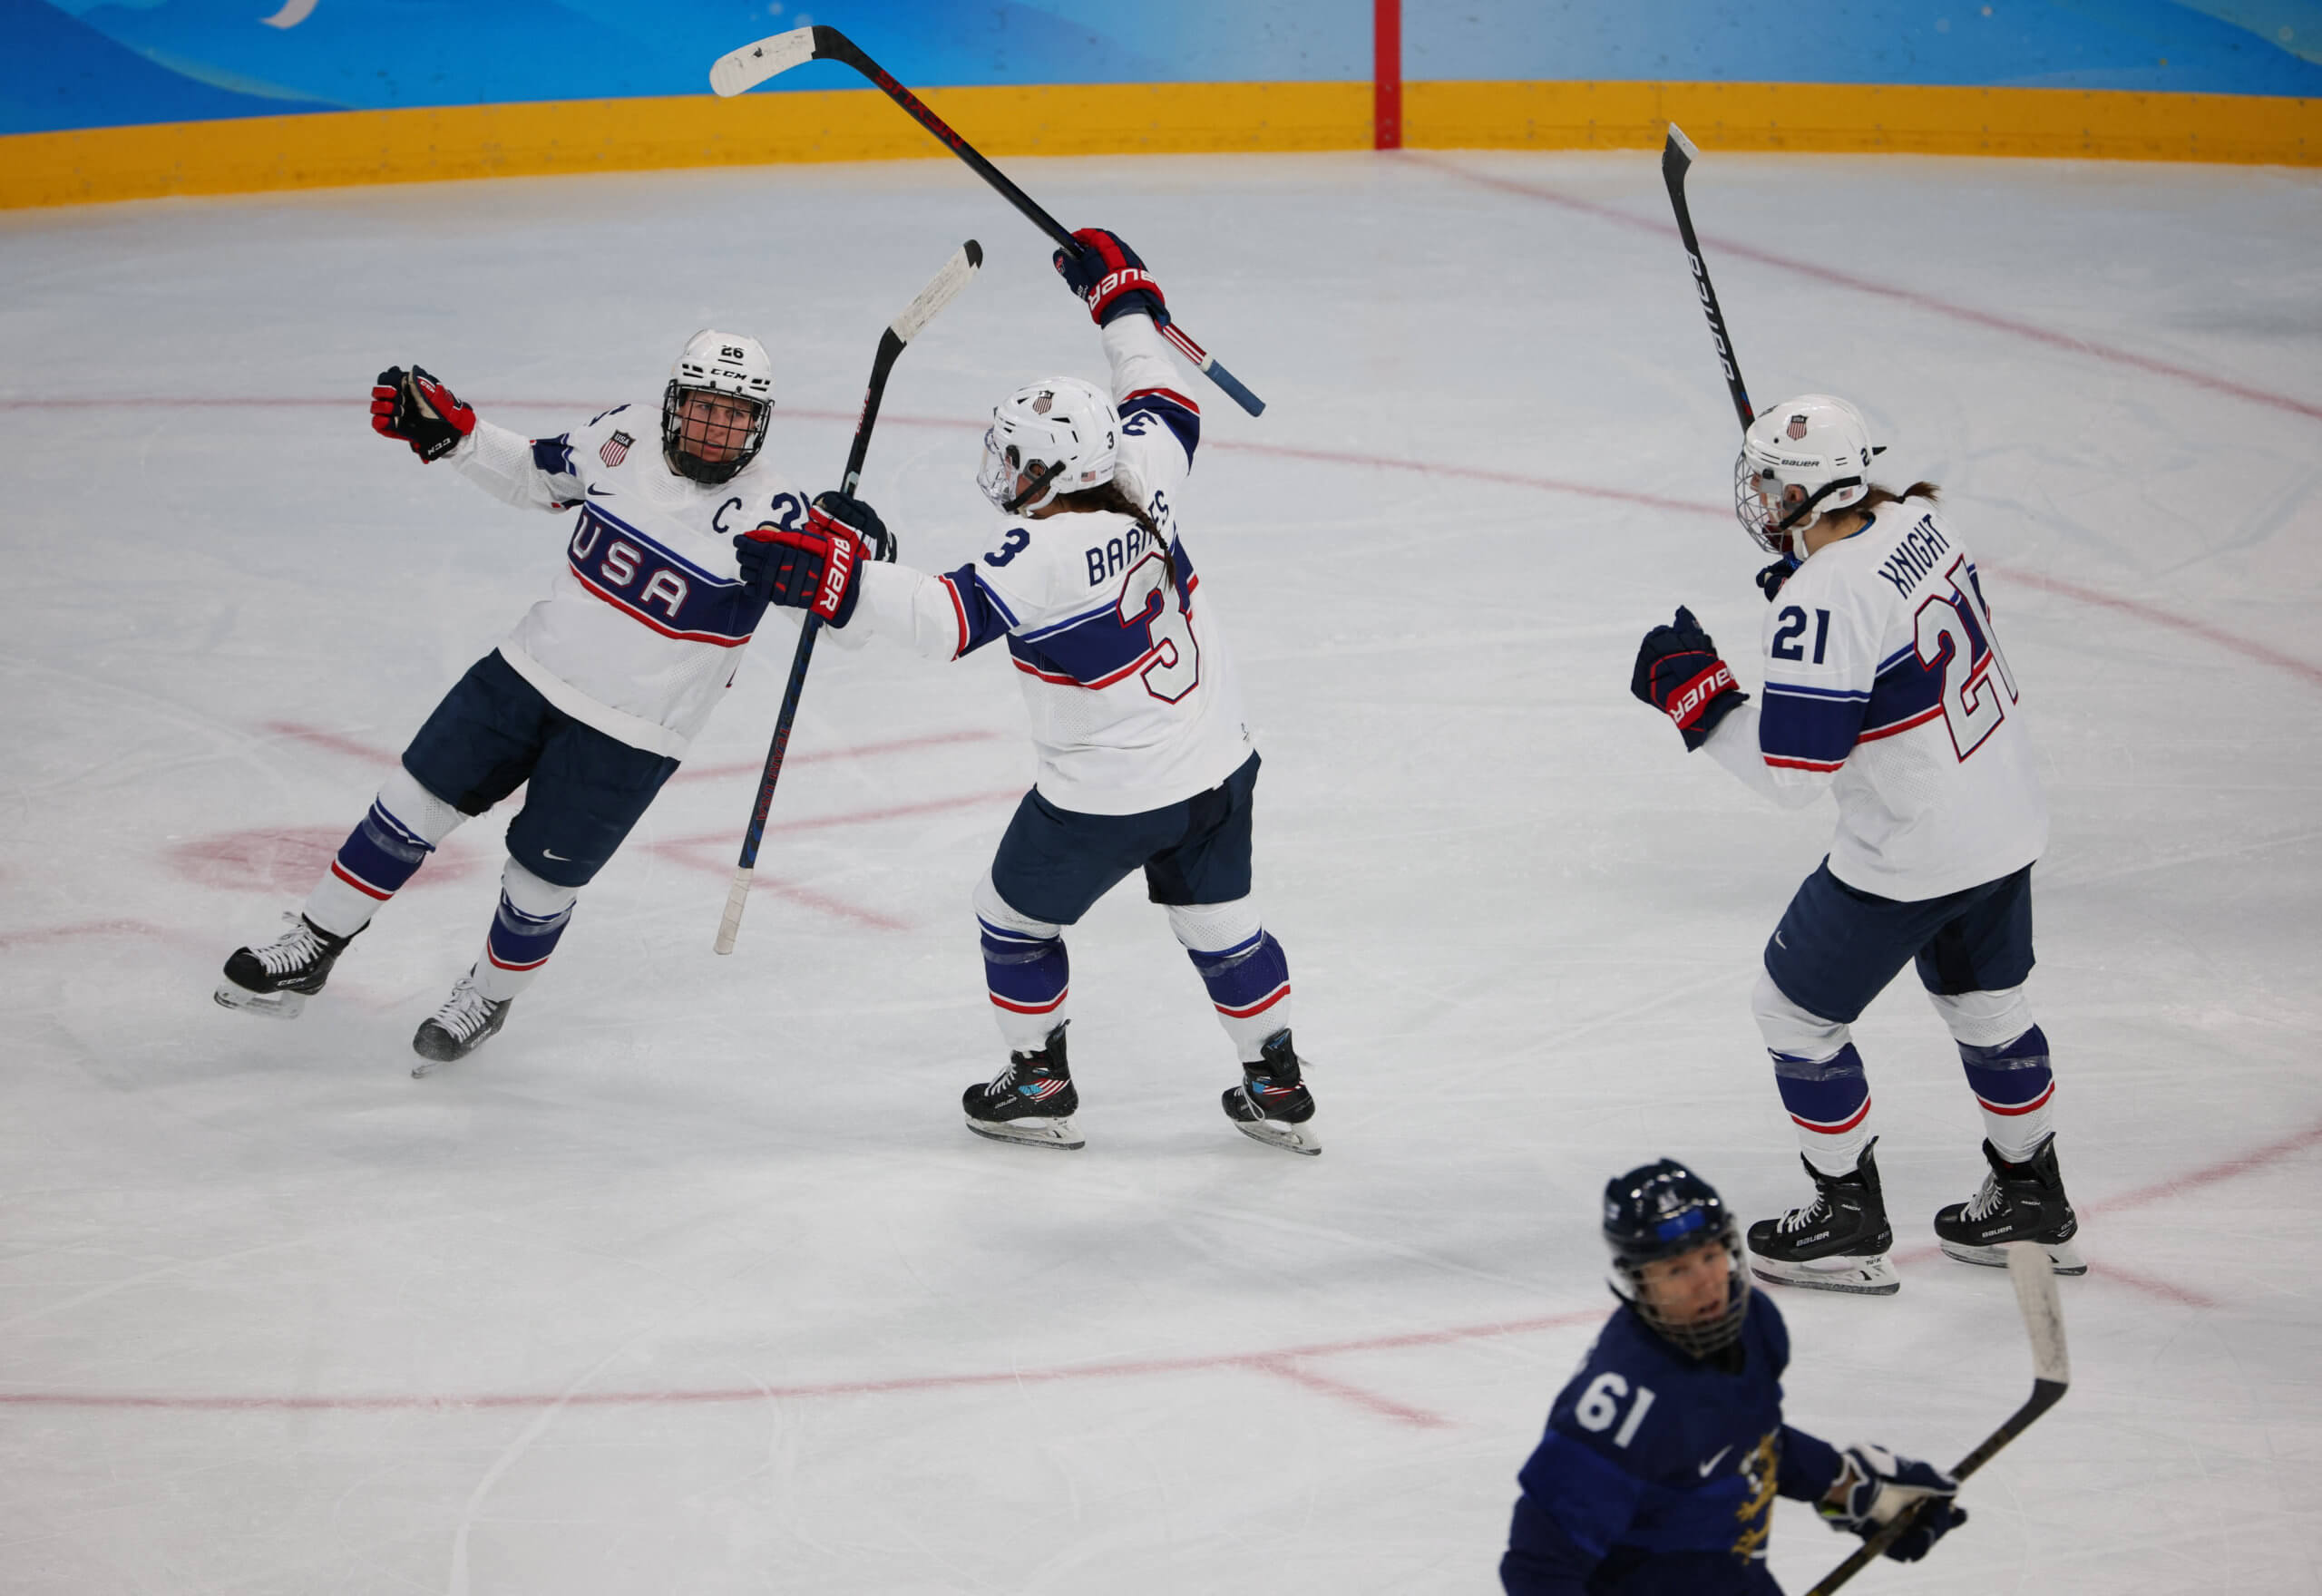 2022 Winter Olympics: Lessons learned for USA women's hockey in